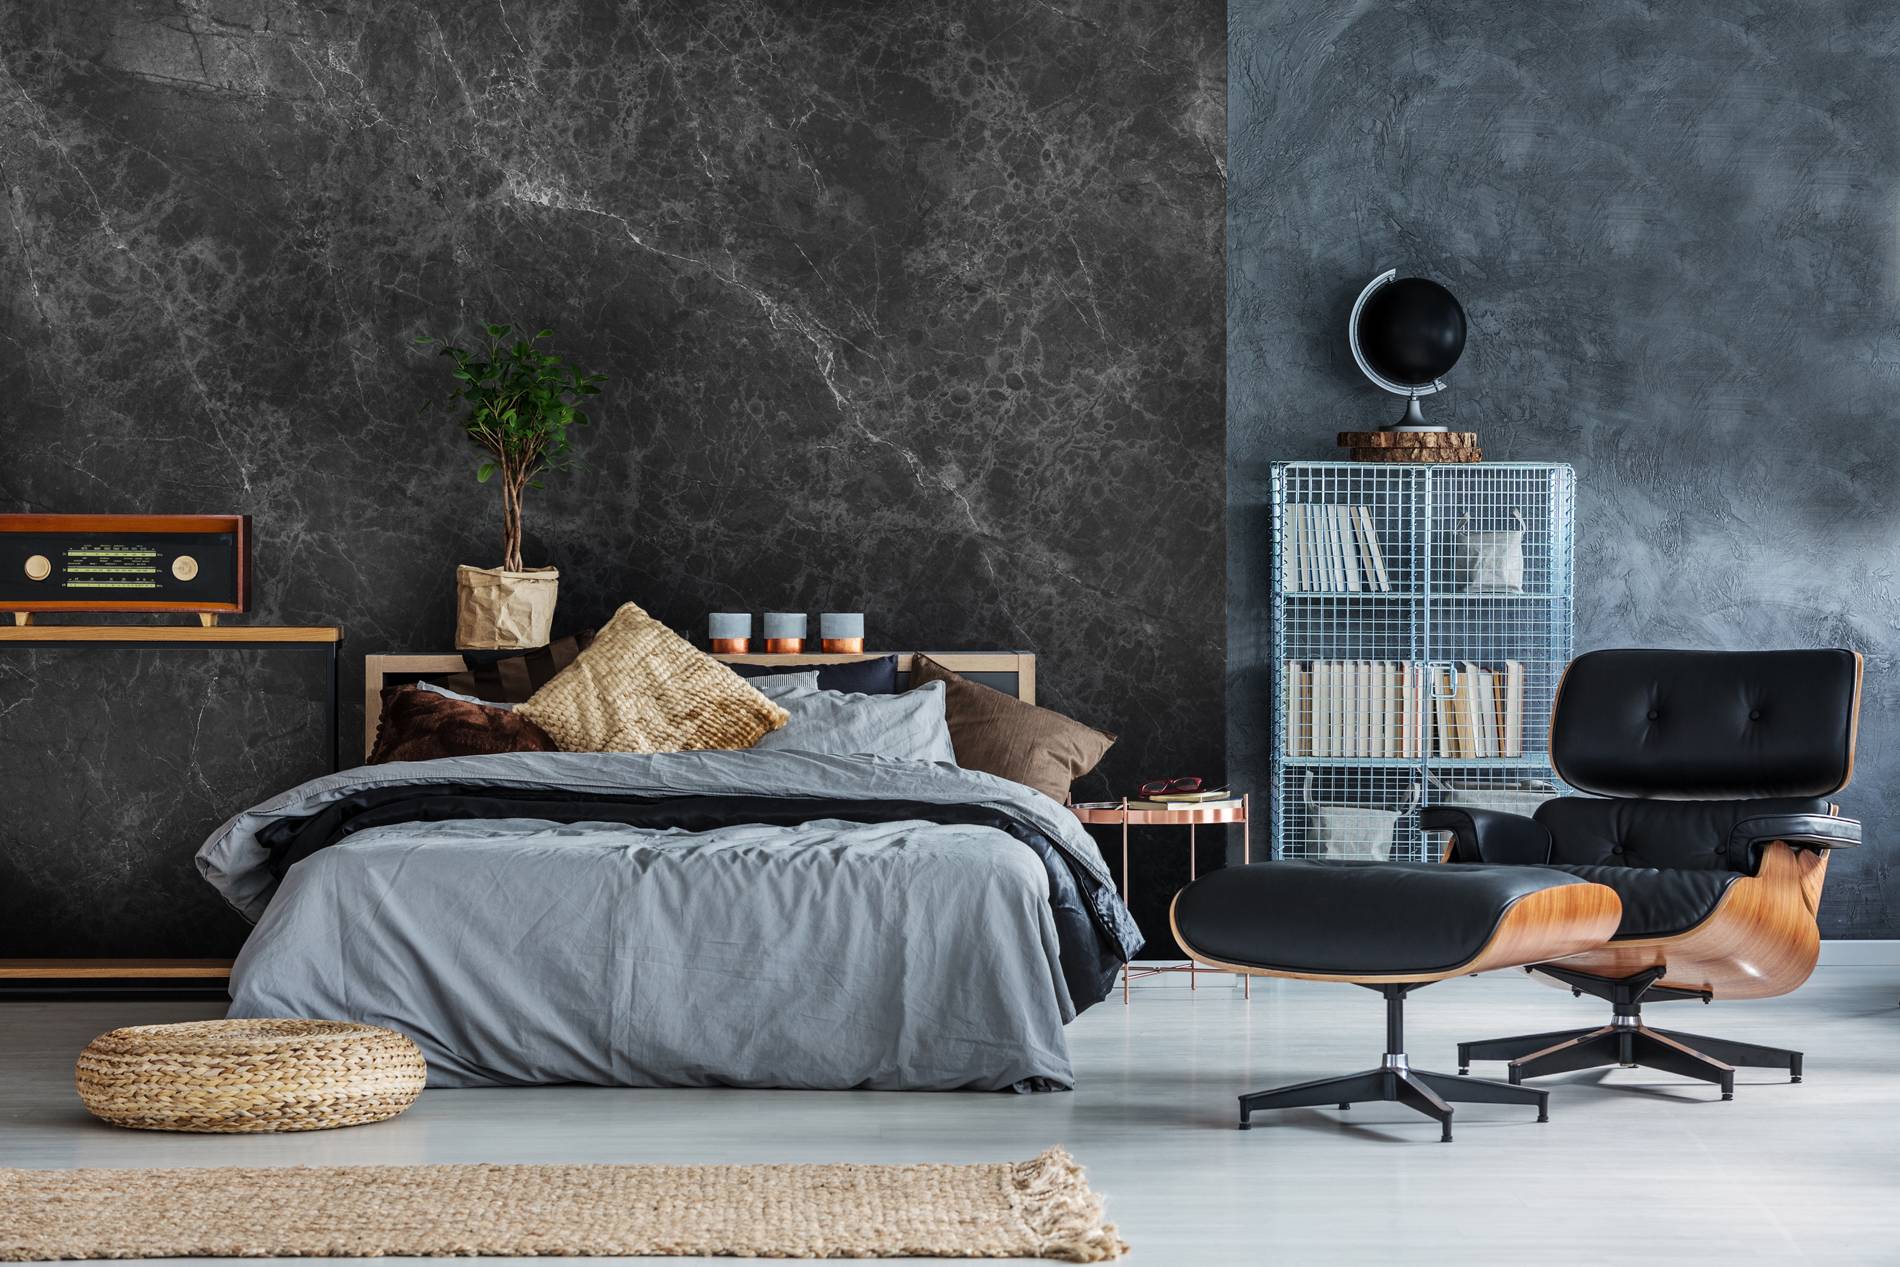 Bedroom in gray • Contemporary - Bedroom - Textures and patterns - Wall Murals